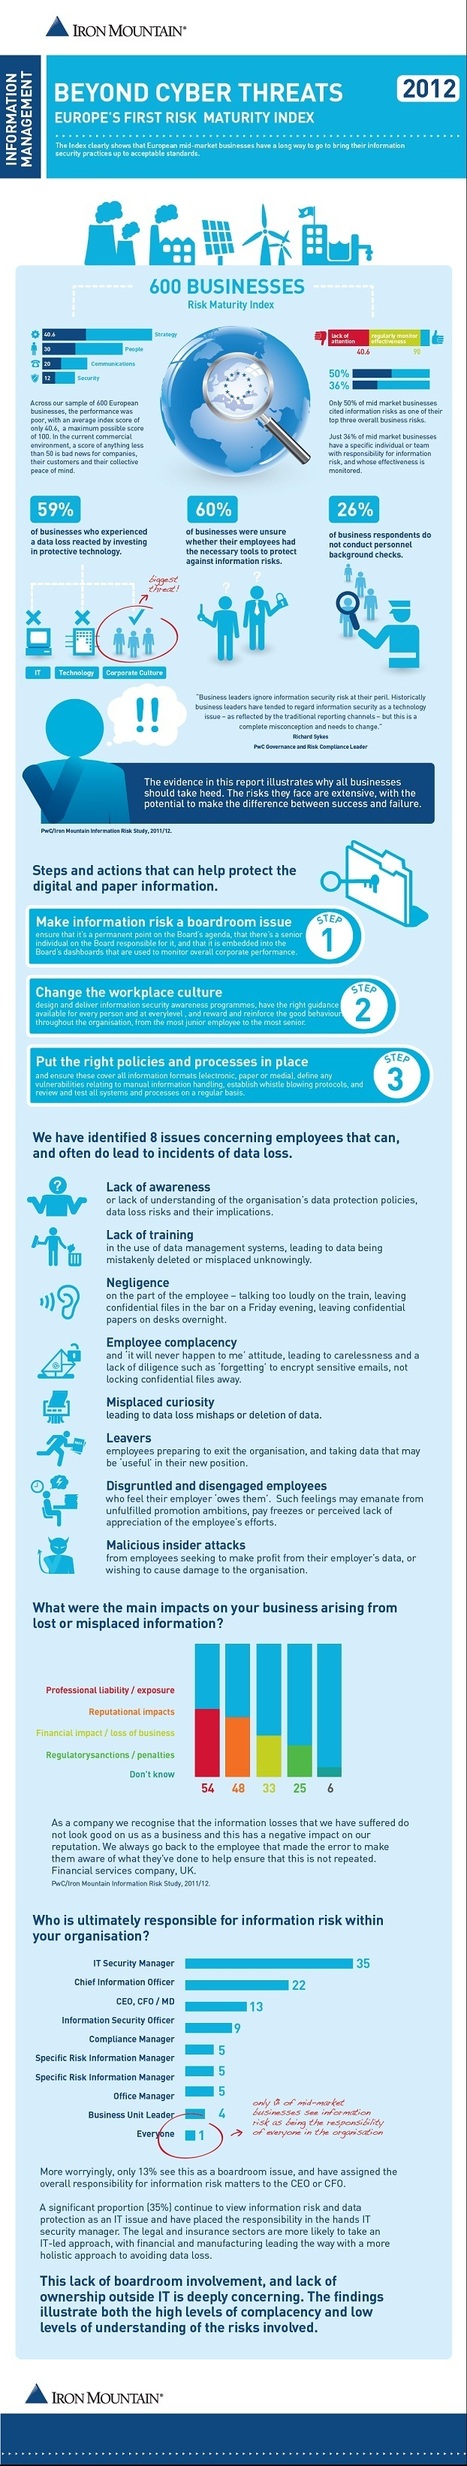 Infographic of the week: Why ignoring information security is lethal | 21st Century Learning and Teaching | Scoop.it